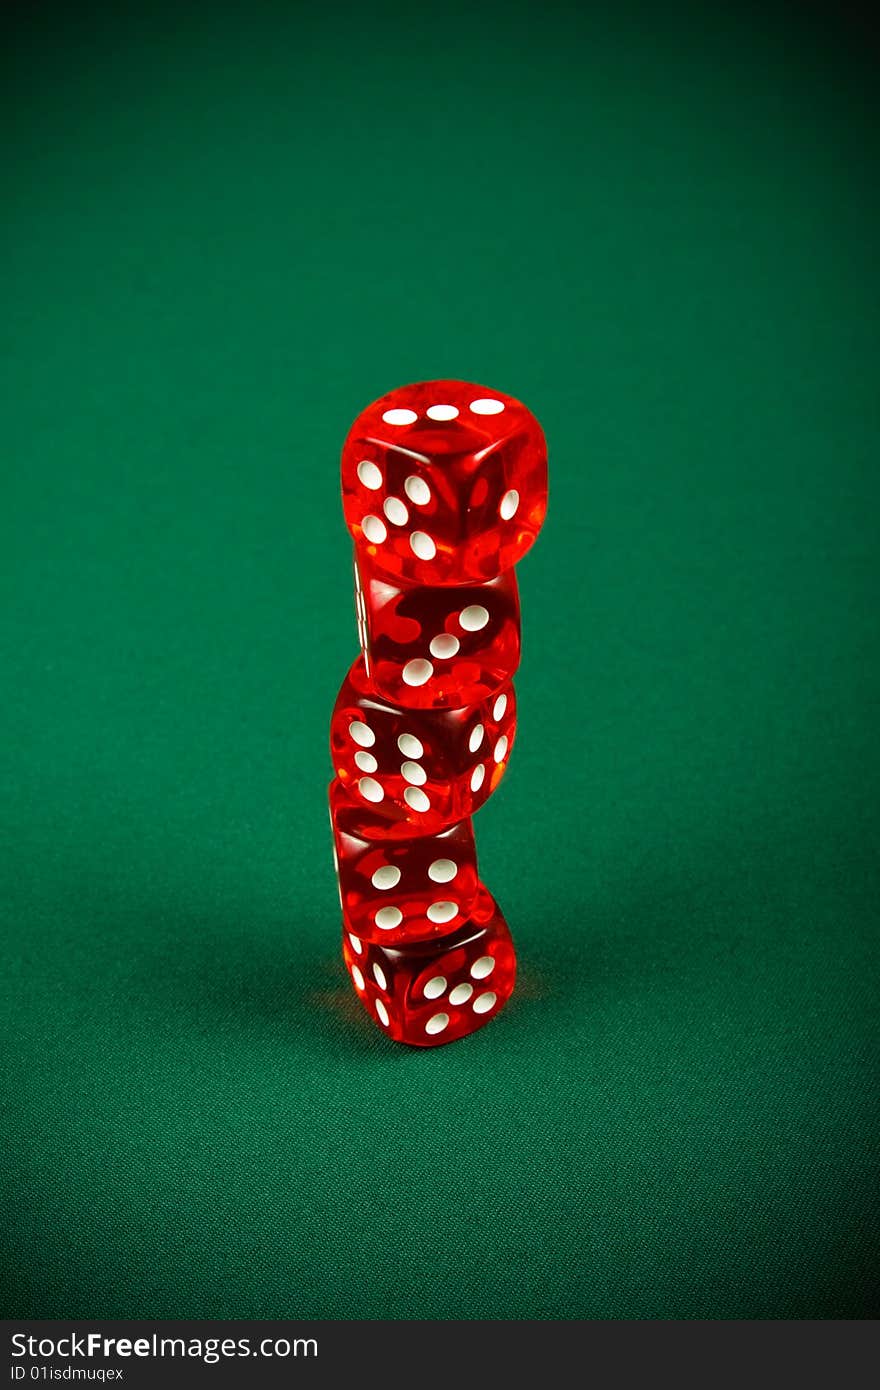 Tower of red dice on casino table